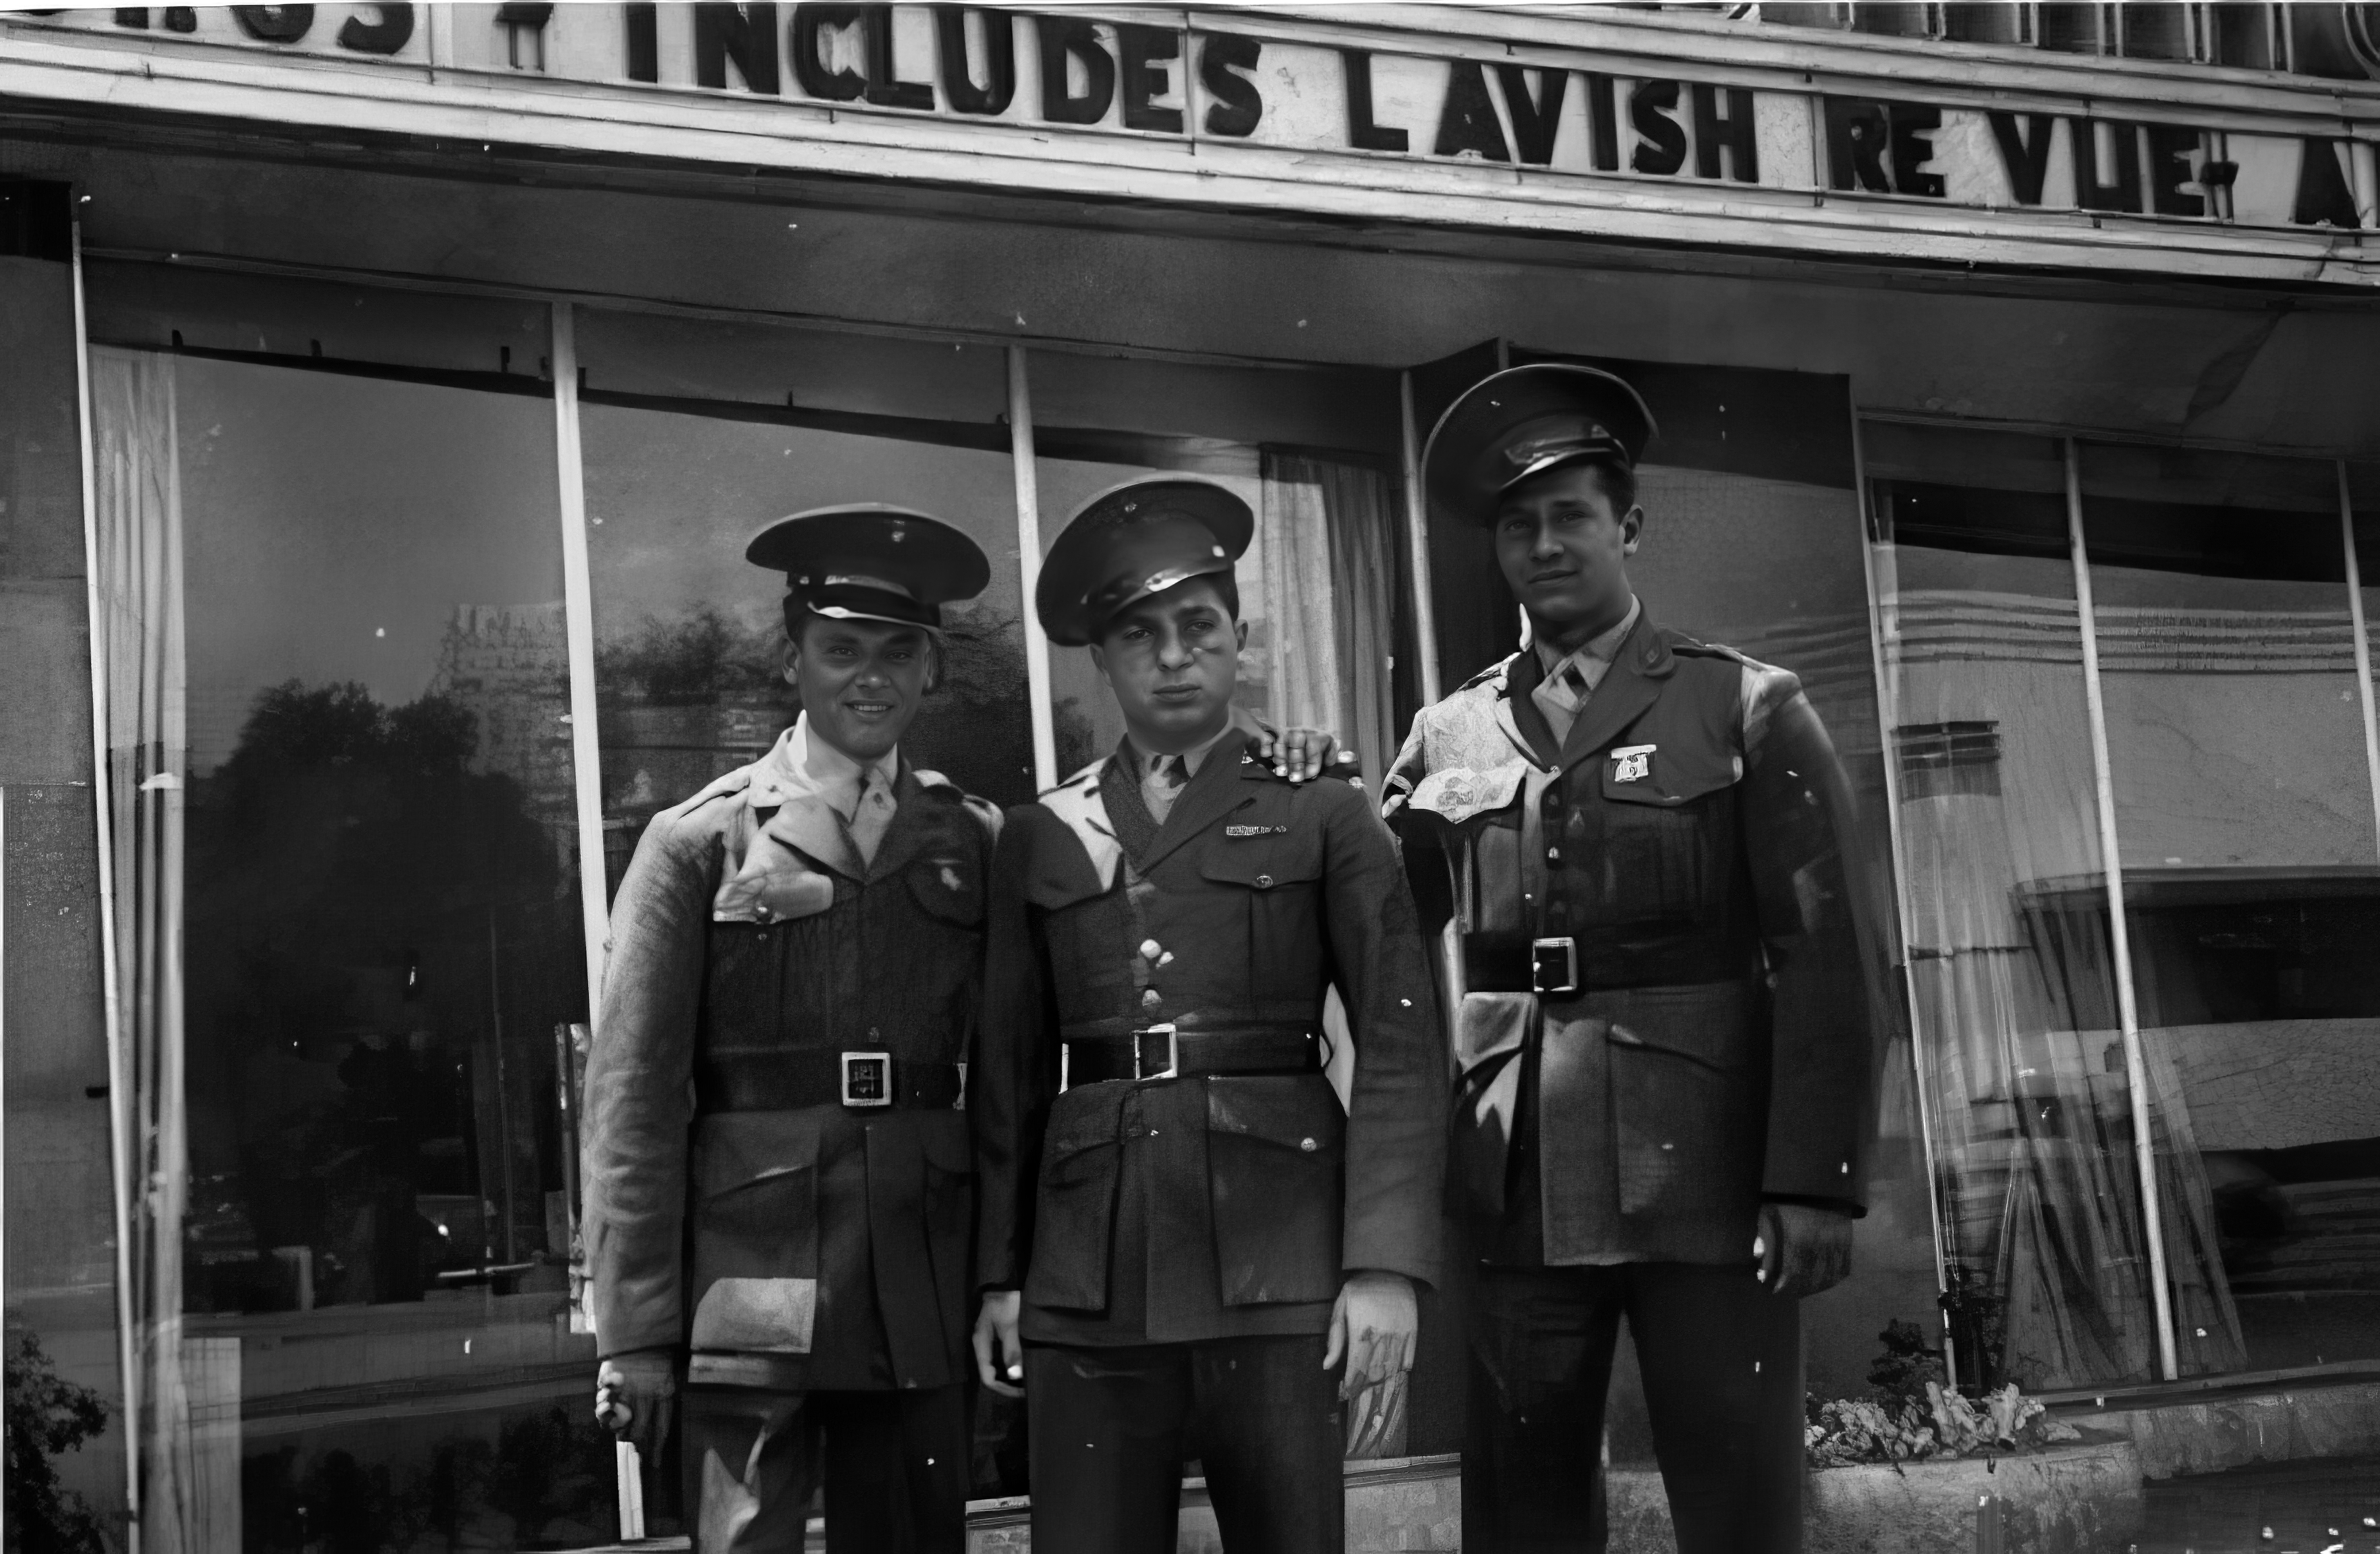 3 young men in uniform in front of a theater entrance